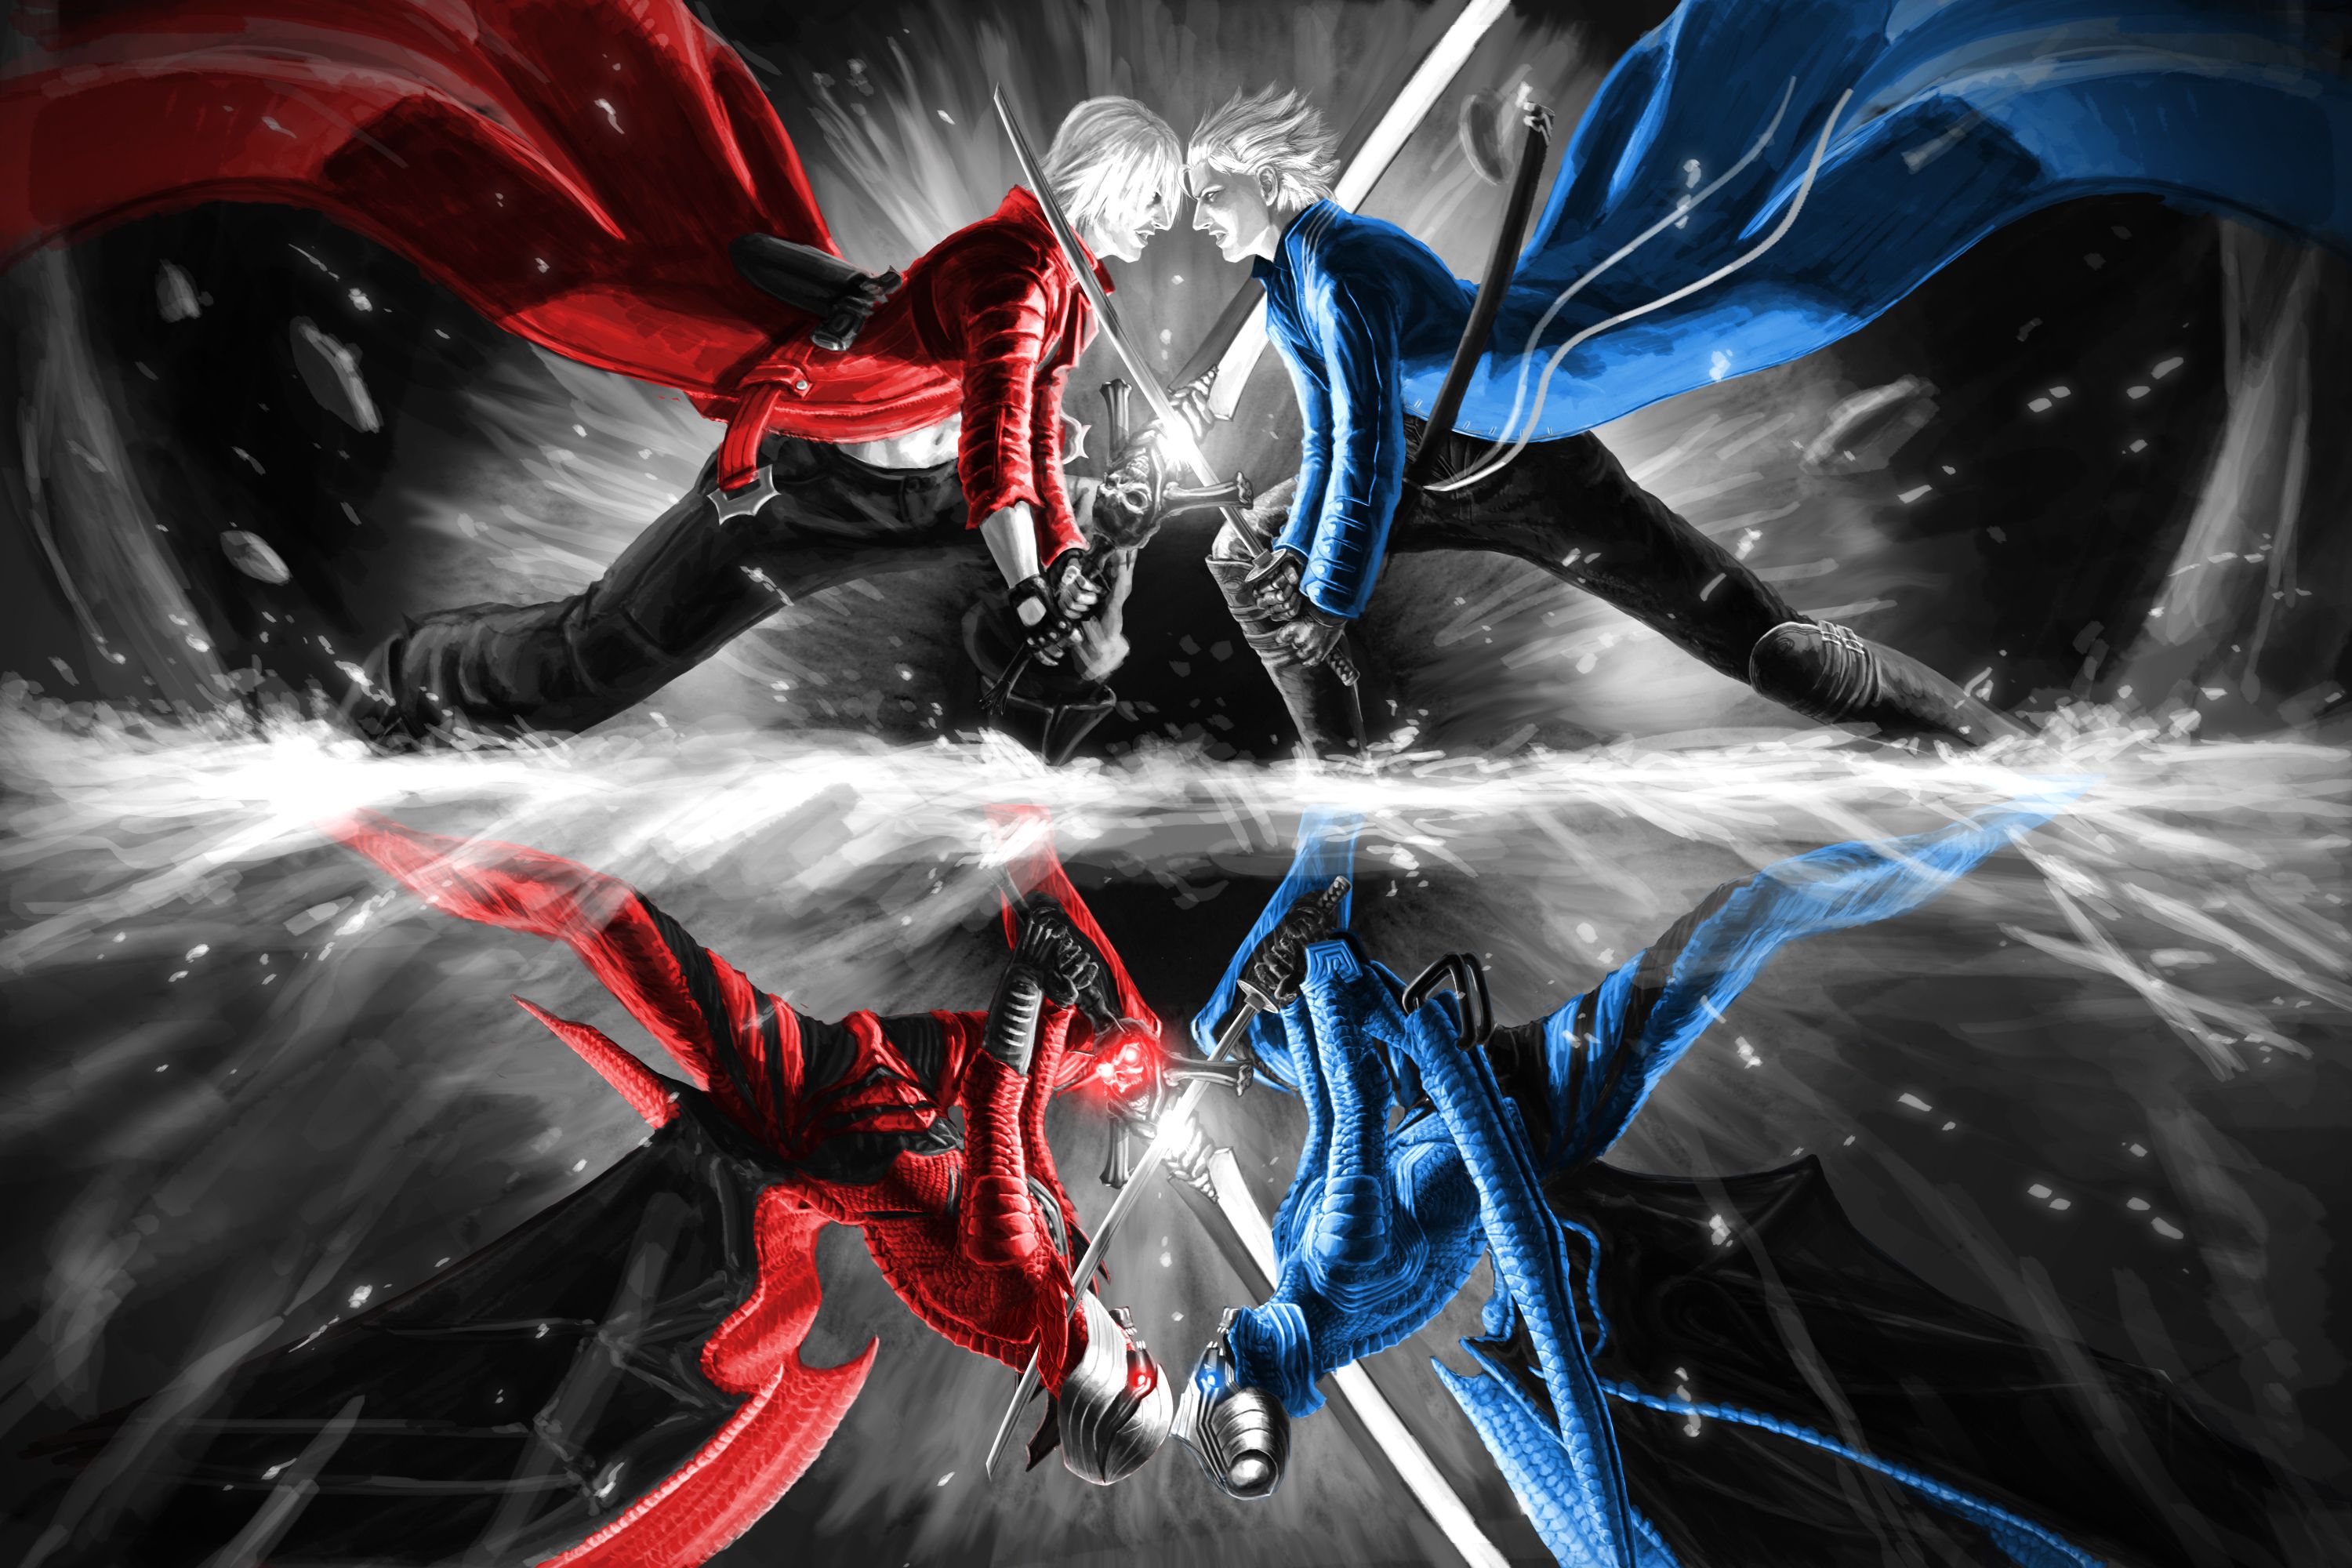 Wallpapers Devil May Cry Dante Games Image #313858 Download